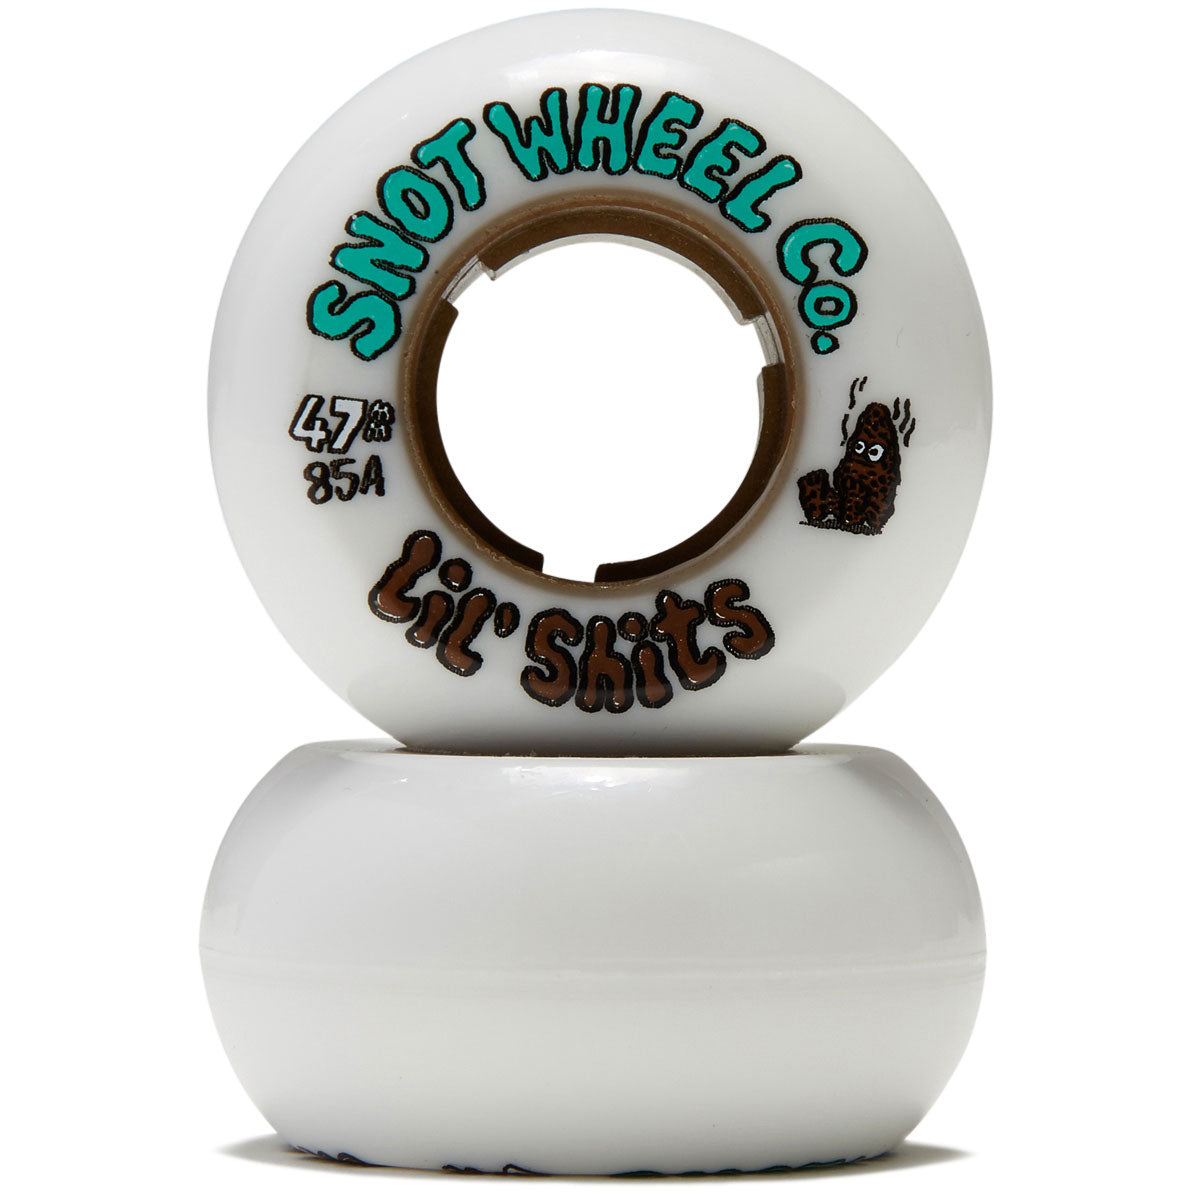 Snot Lil Shits 85a Skateboard Wheels - 47mm image 2